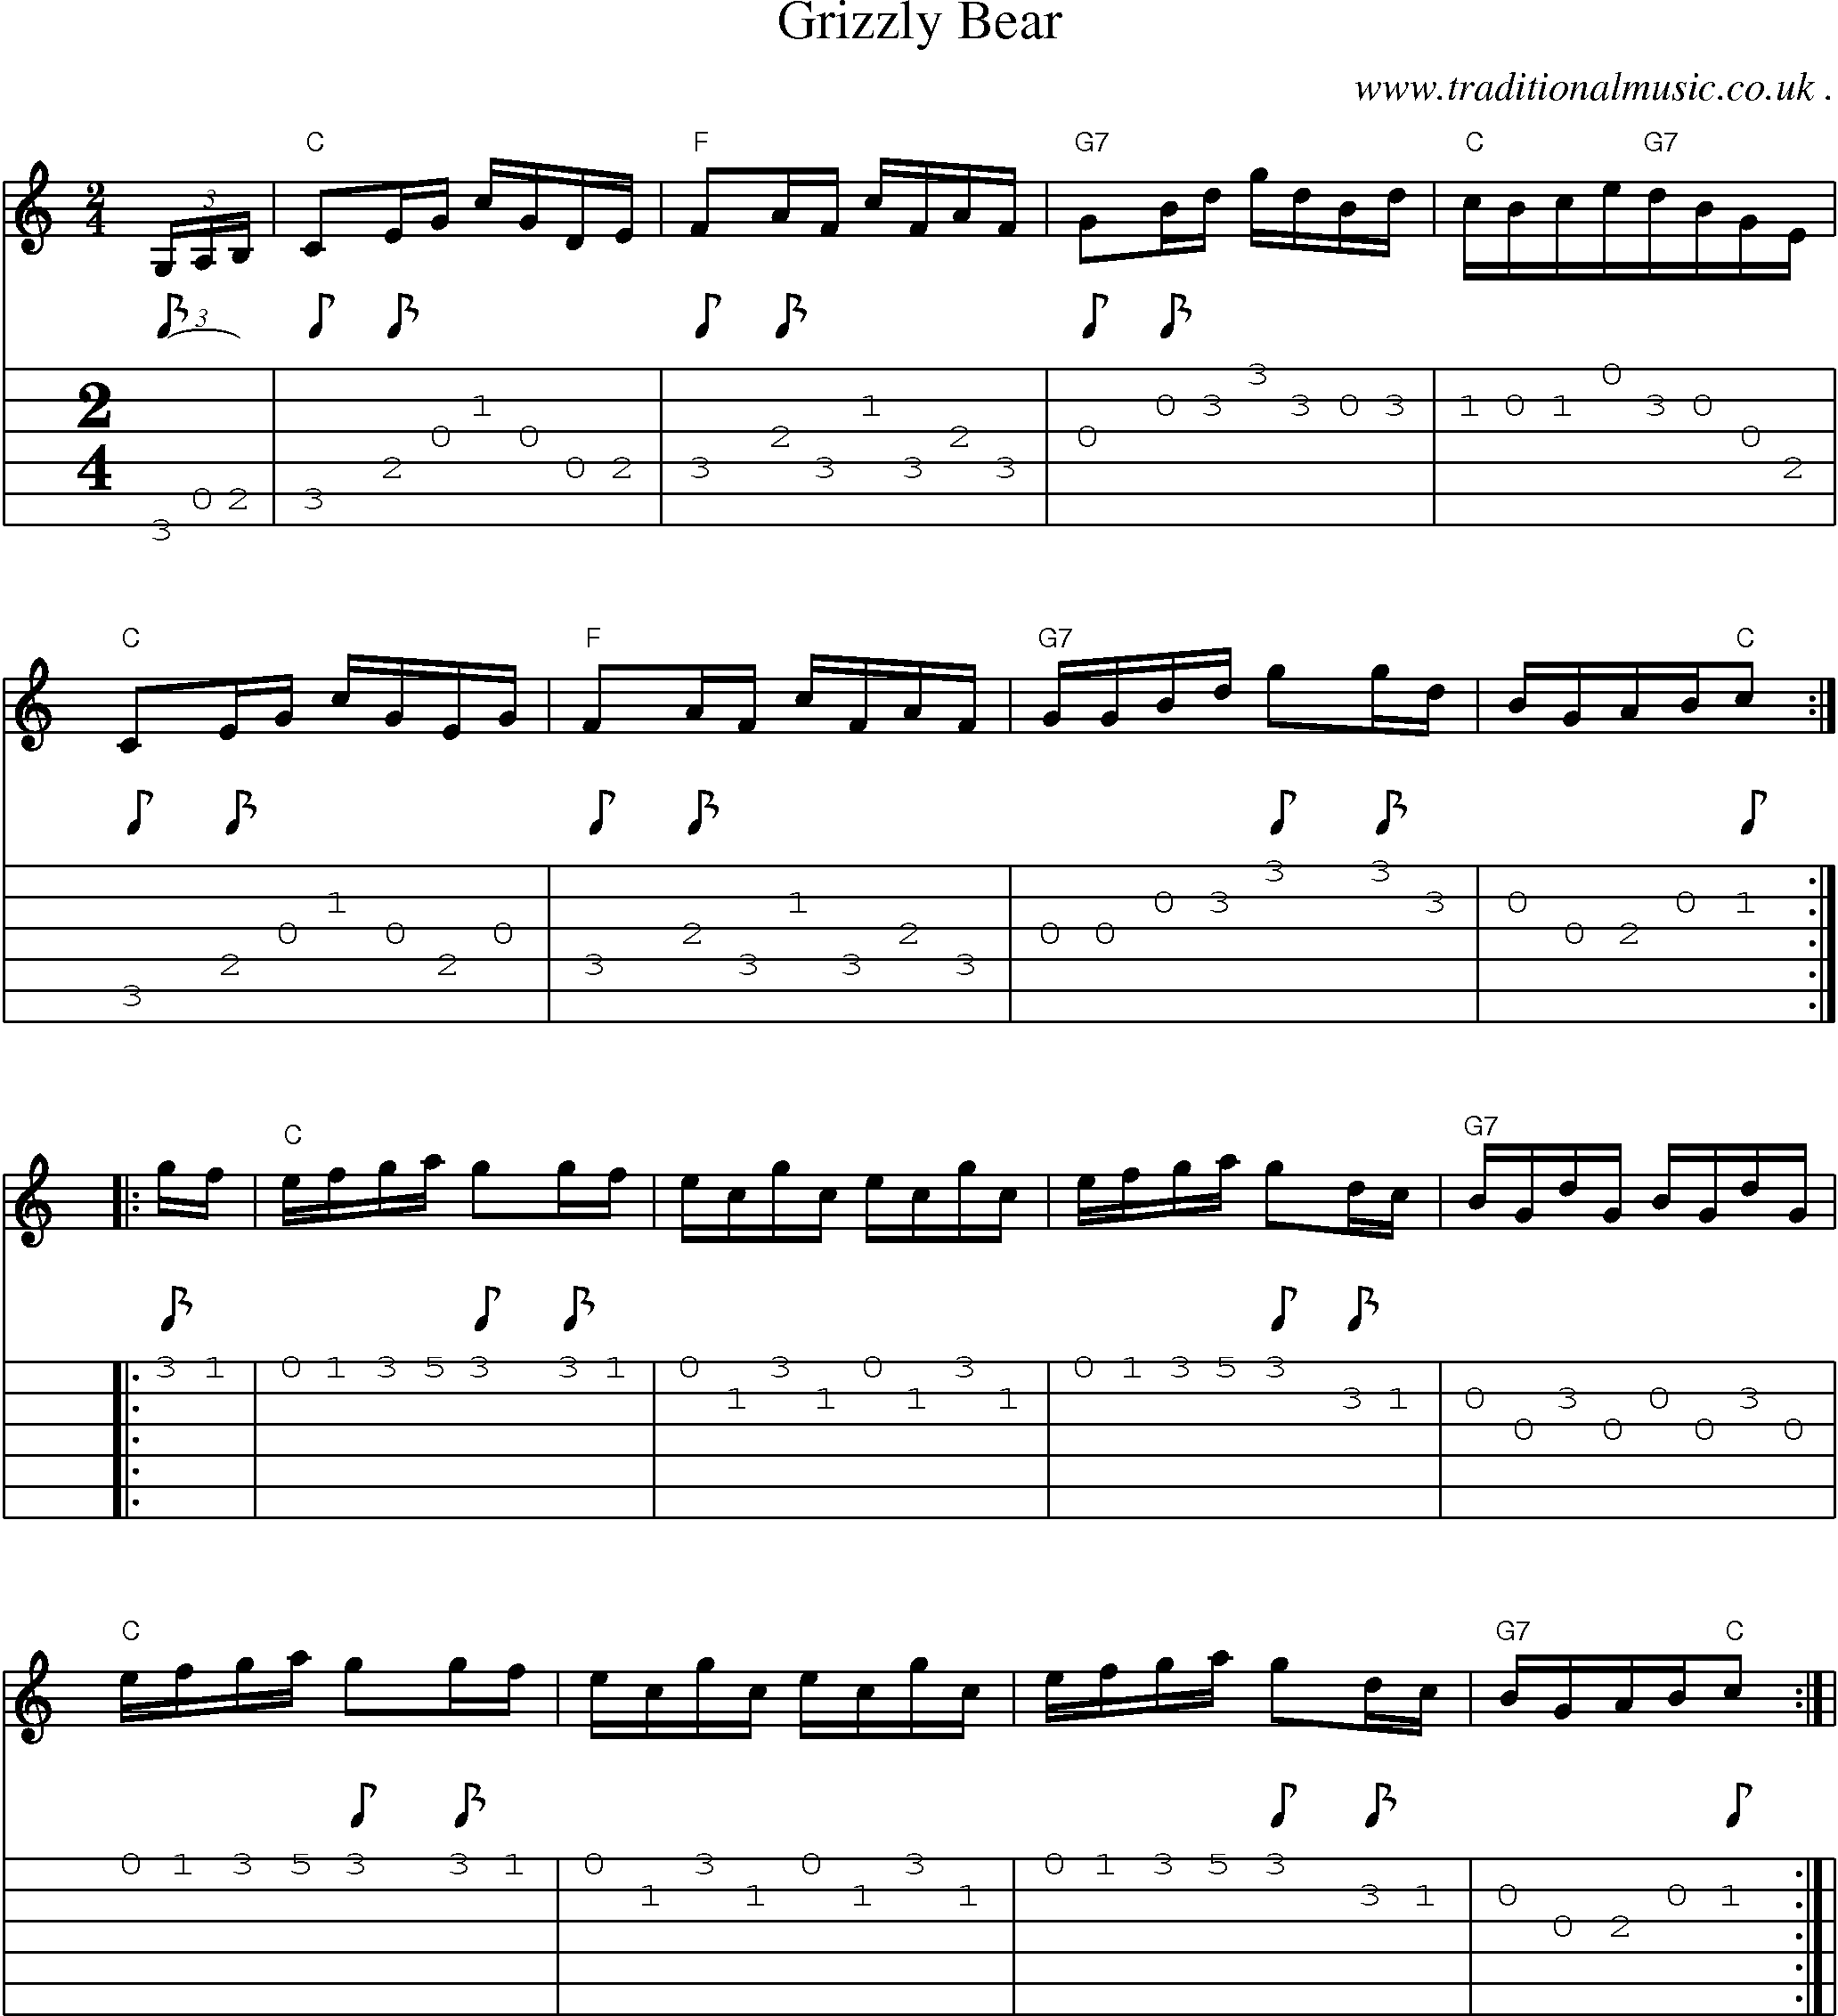 Sheet-Music and Guitar Tabs for Grizzly Bear